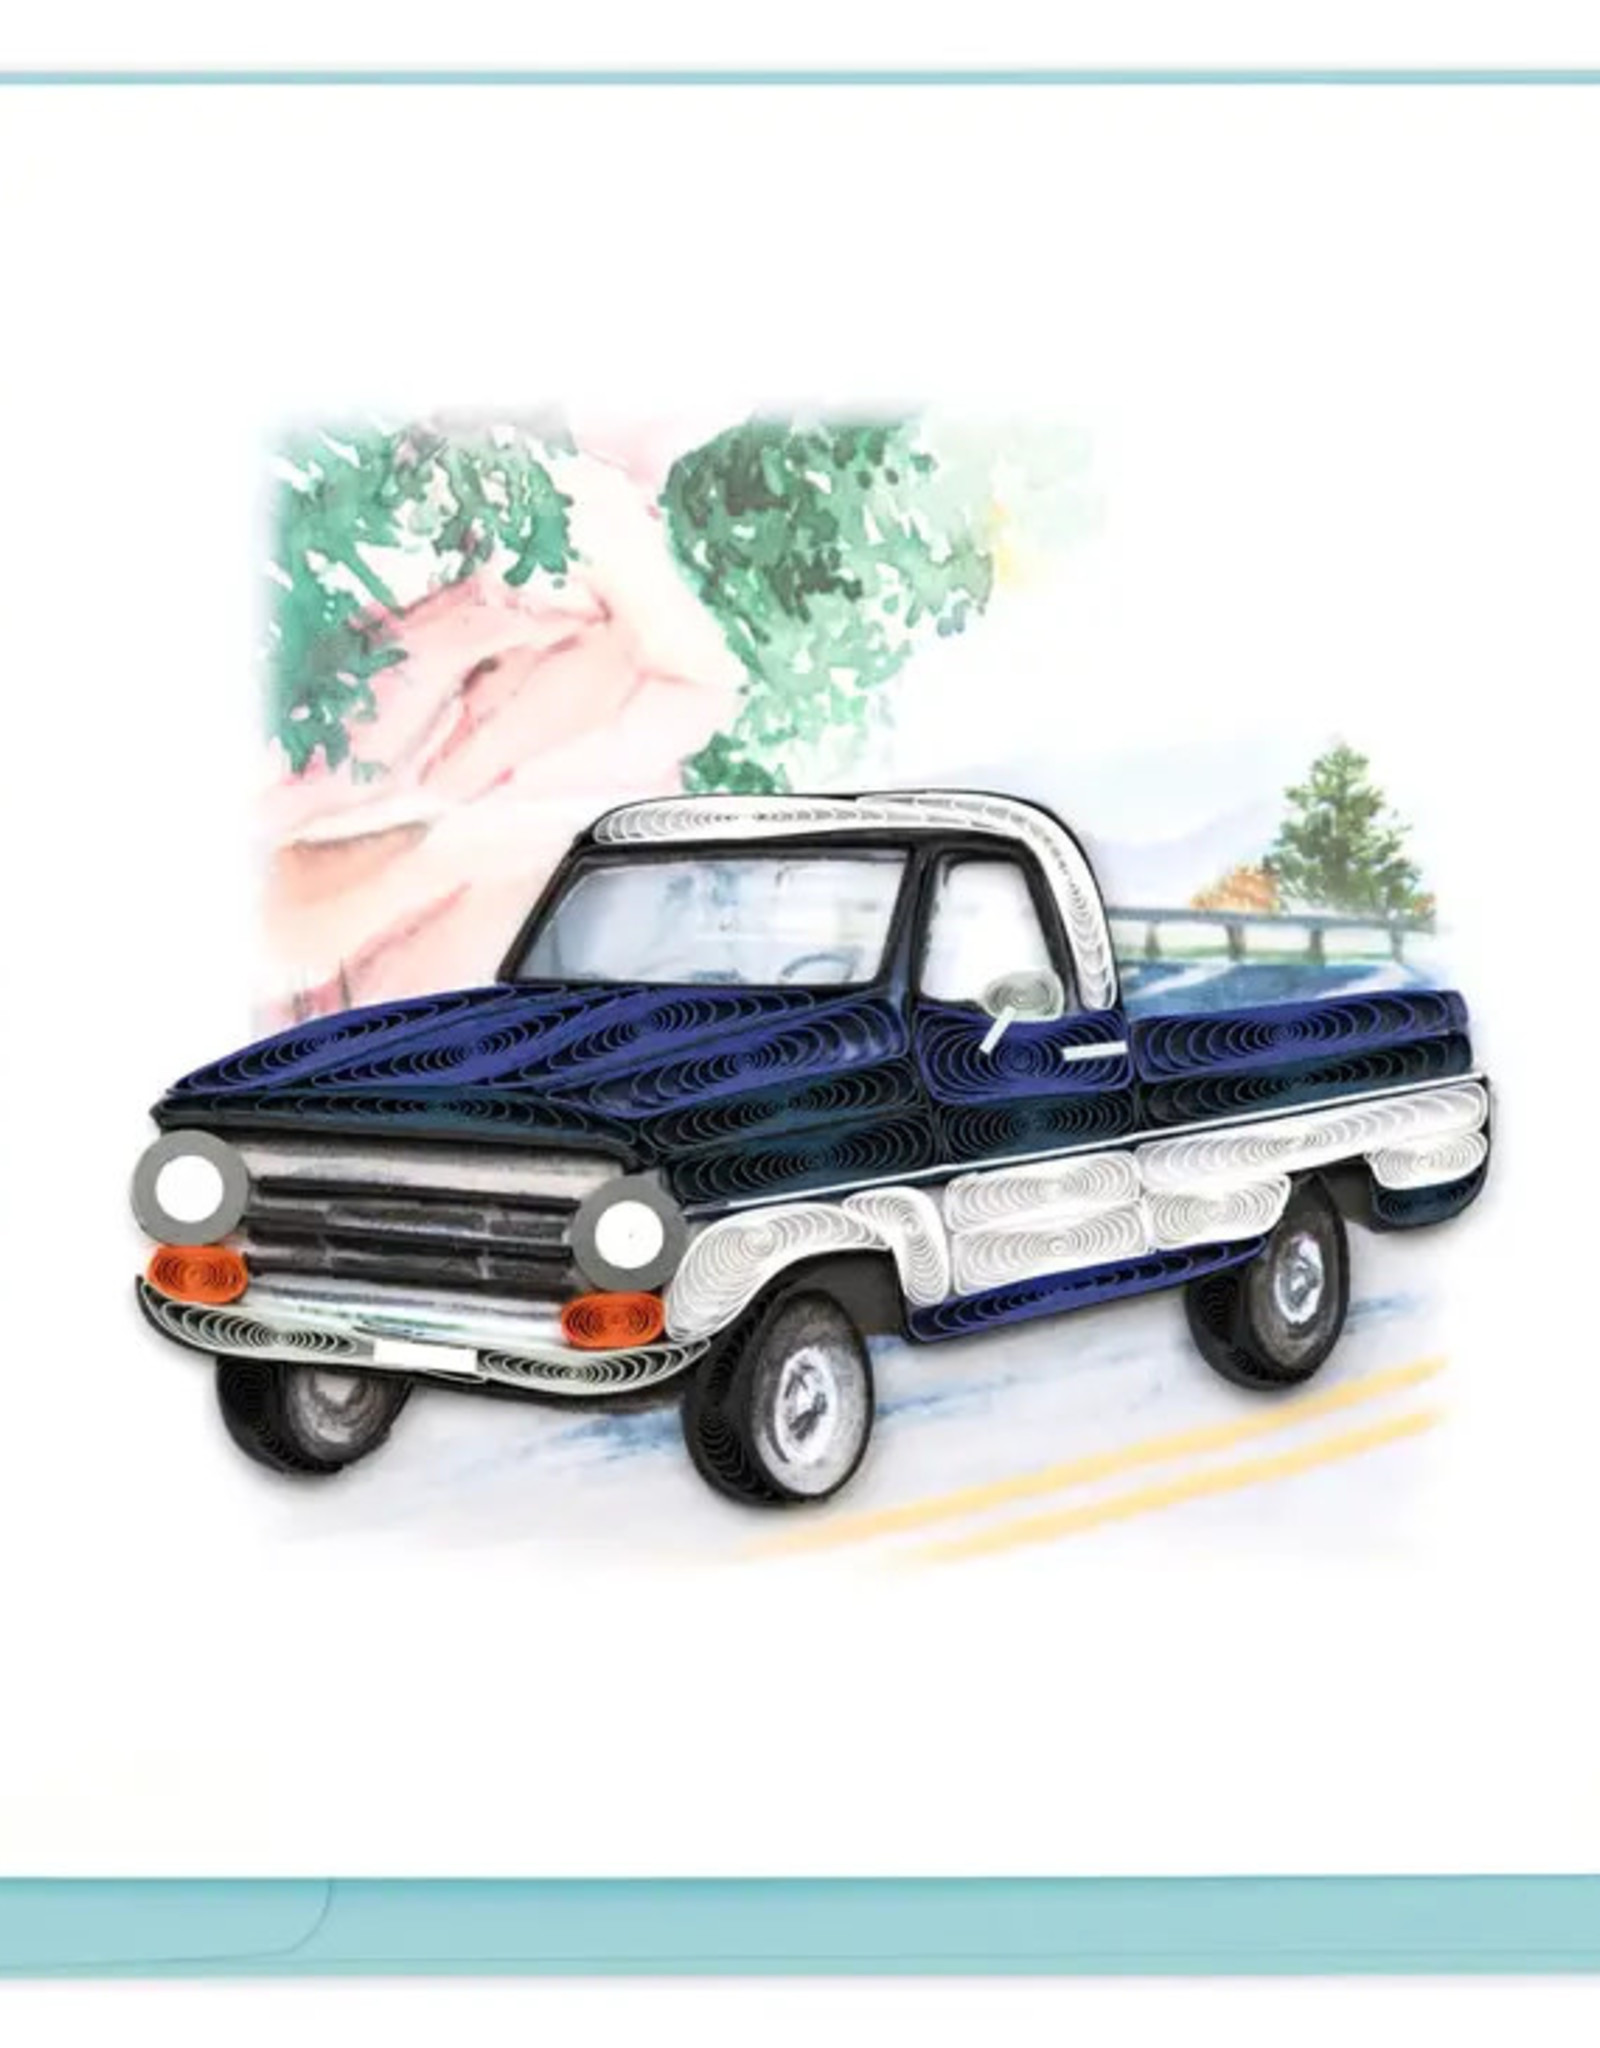 Quilling Card Quilled Pickup Truck Greeting Card